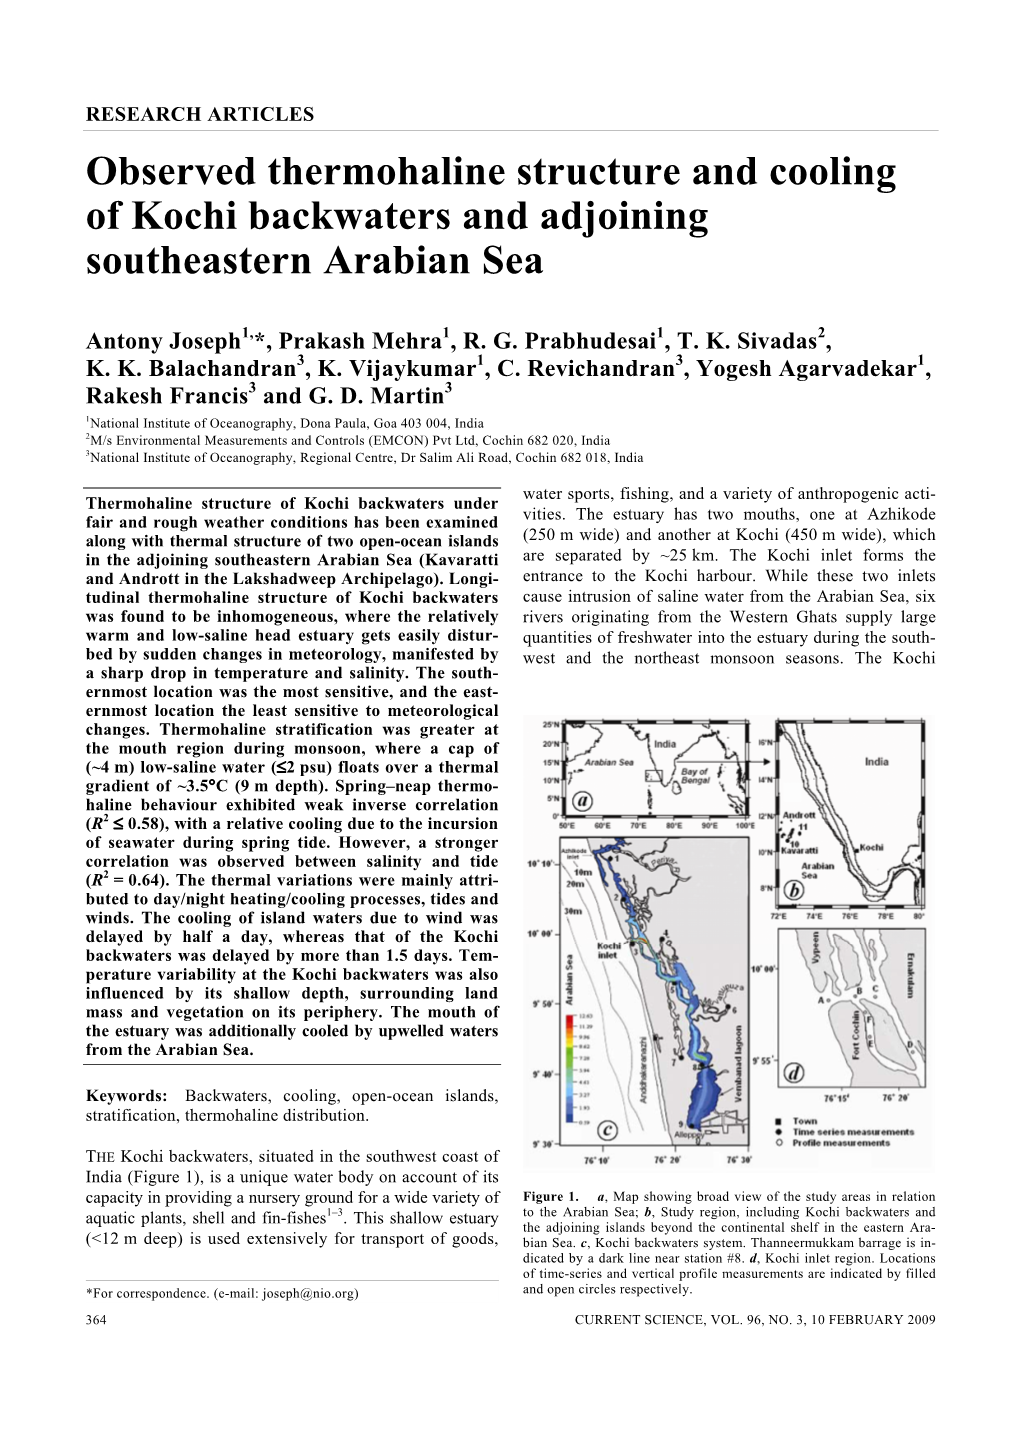 Observed Thermohaline Structure and Cooling of Kochi Backwaters and Adjoining Southeastern Arabian Sea